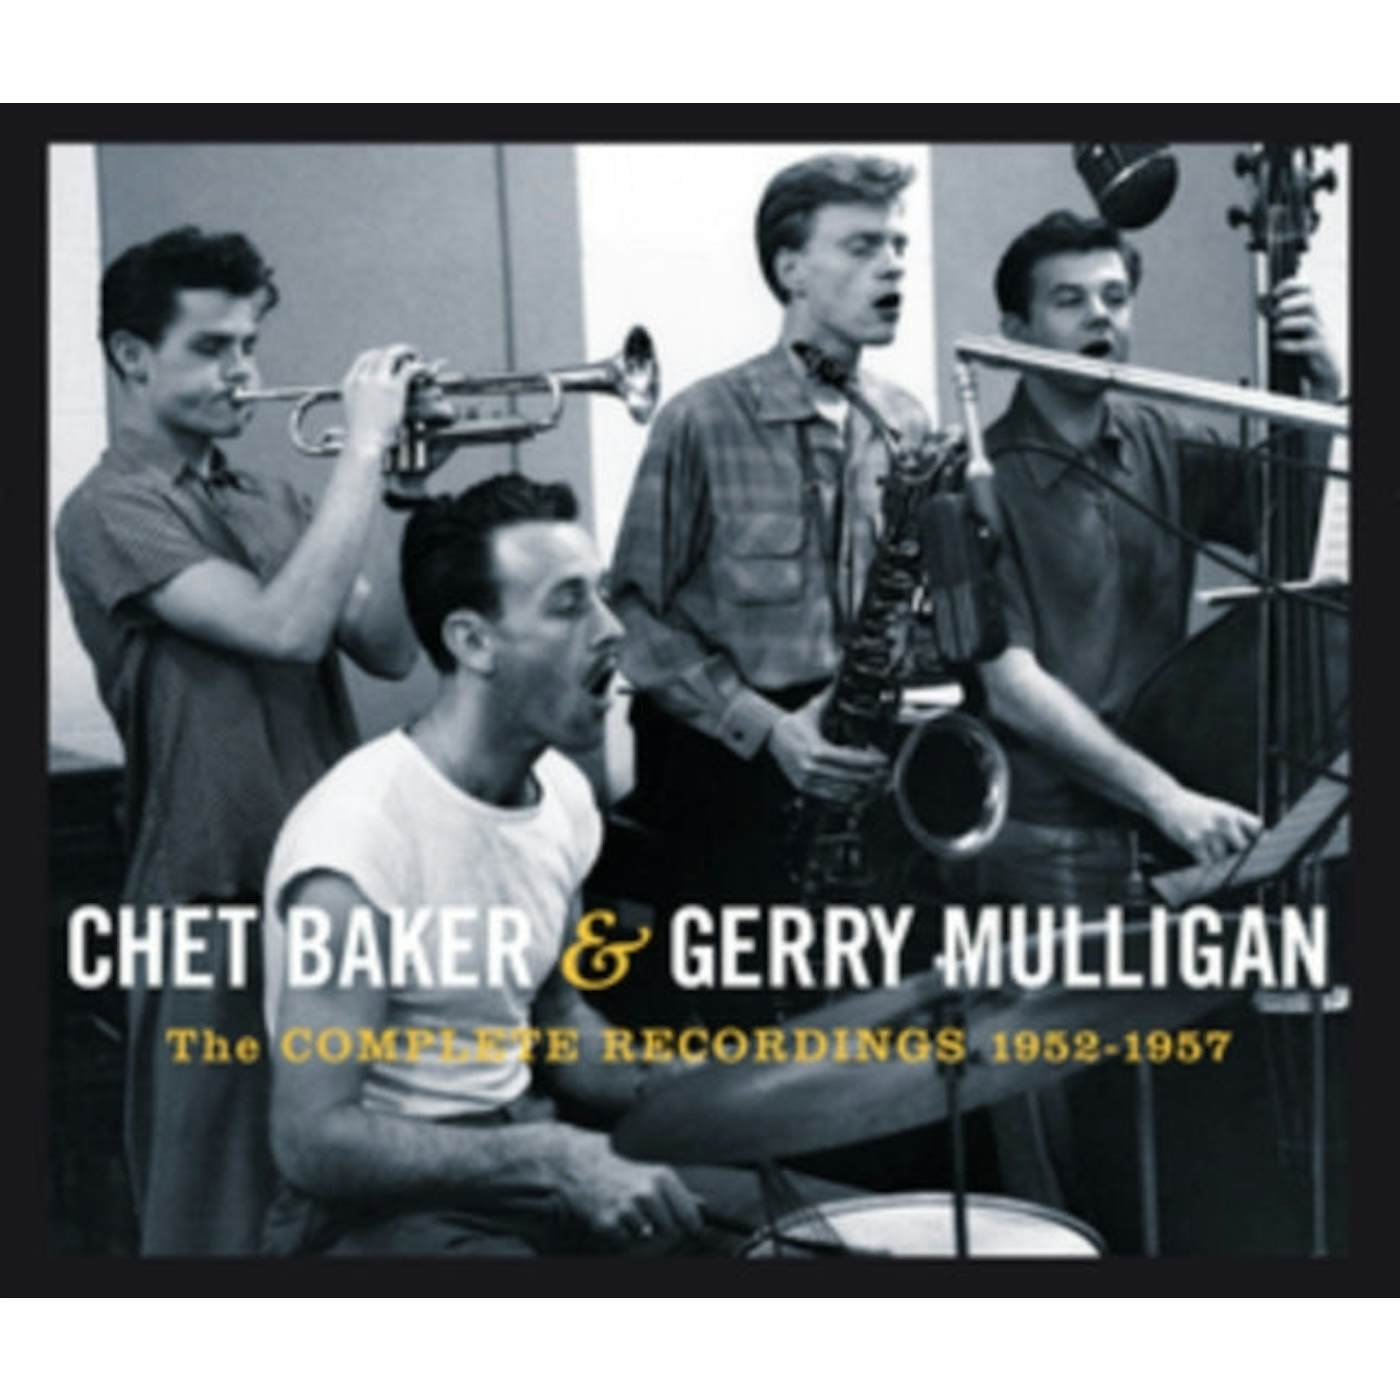 Chet Baker & Gerry Mulligan CD - The Complete Recordings 19 52-57